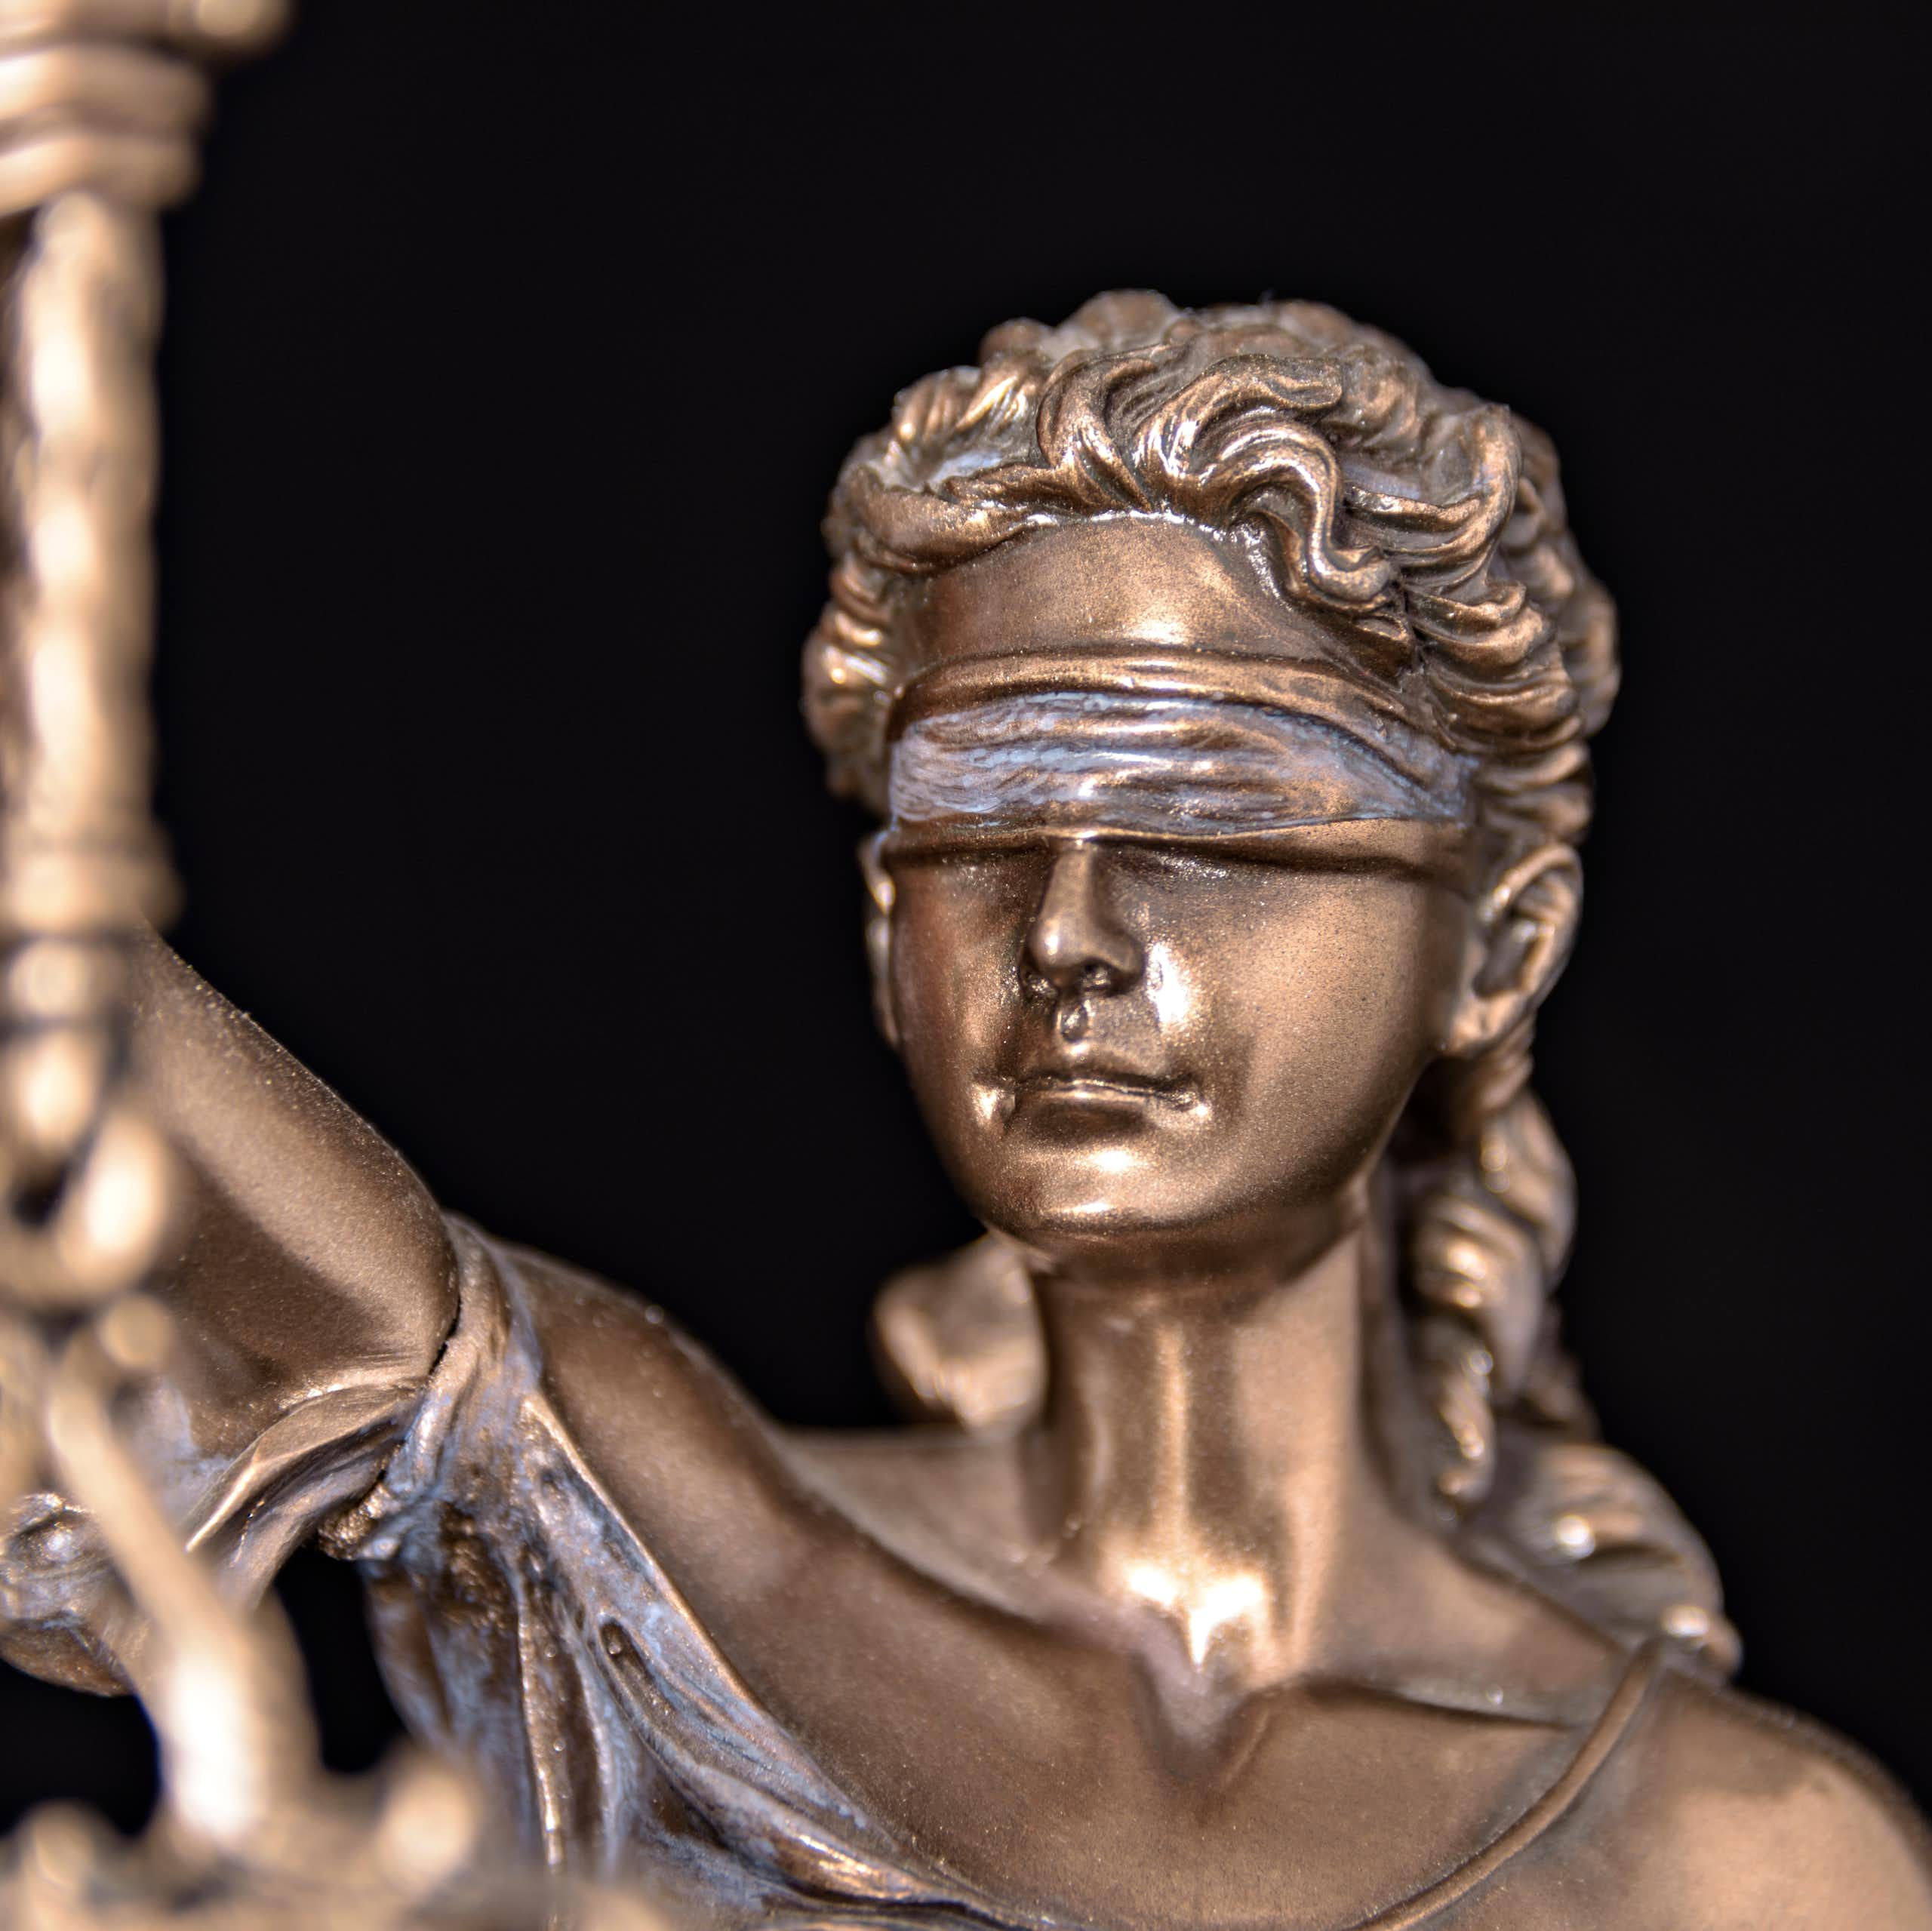 Close-up of a bronze figurine of Lady Justice wearing a blindfold.